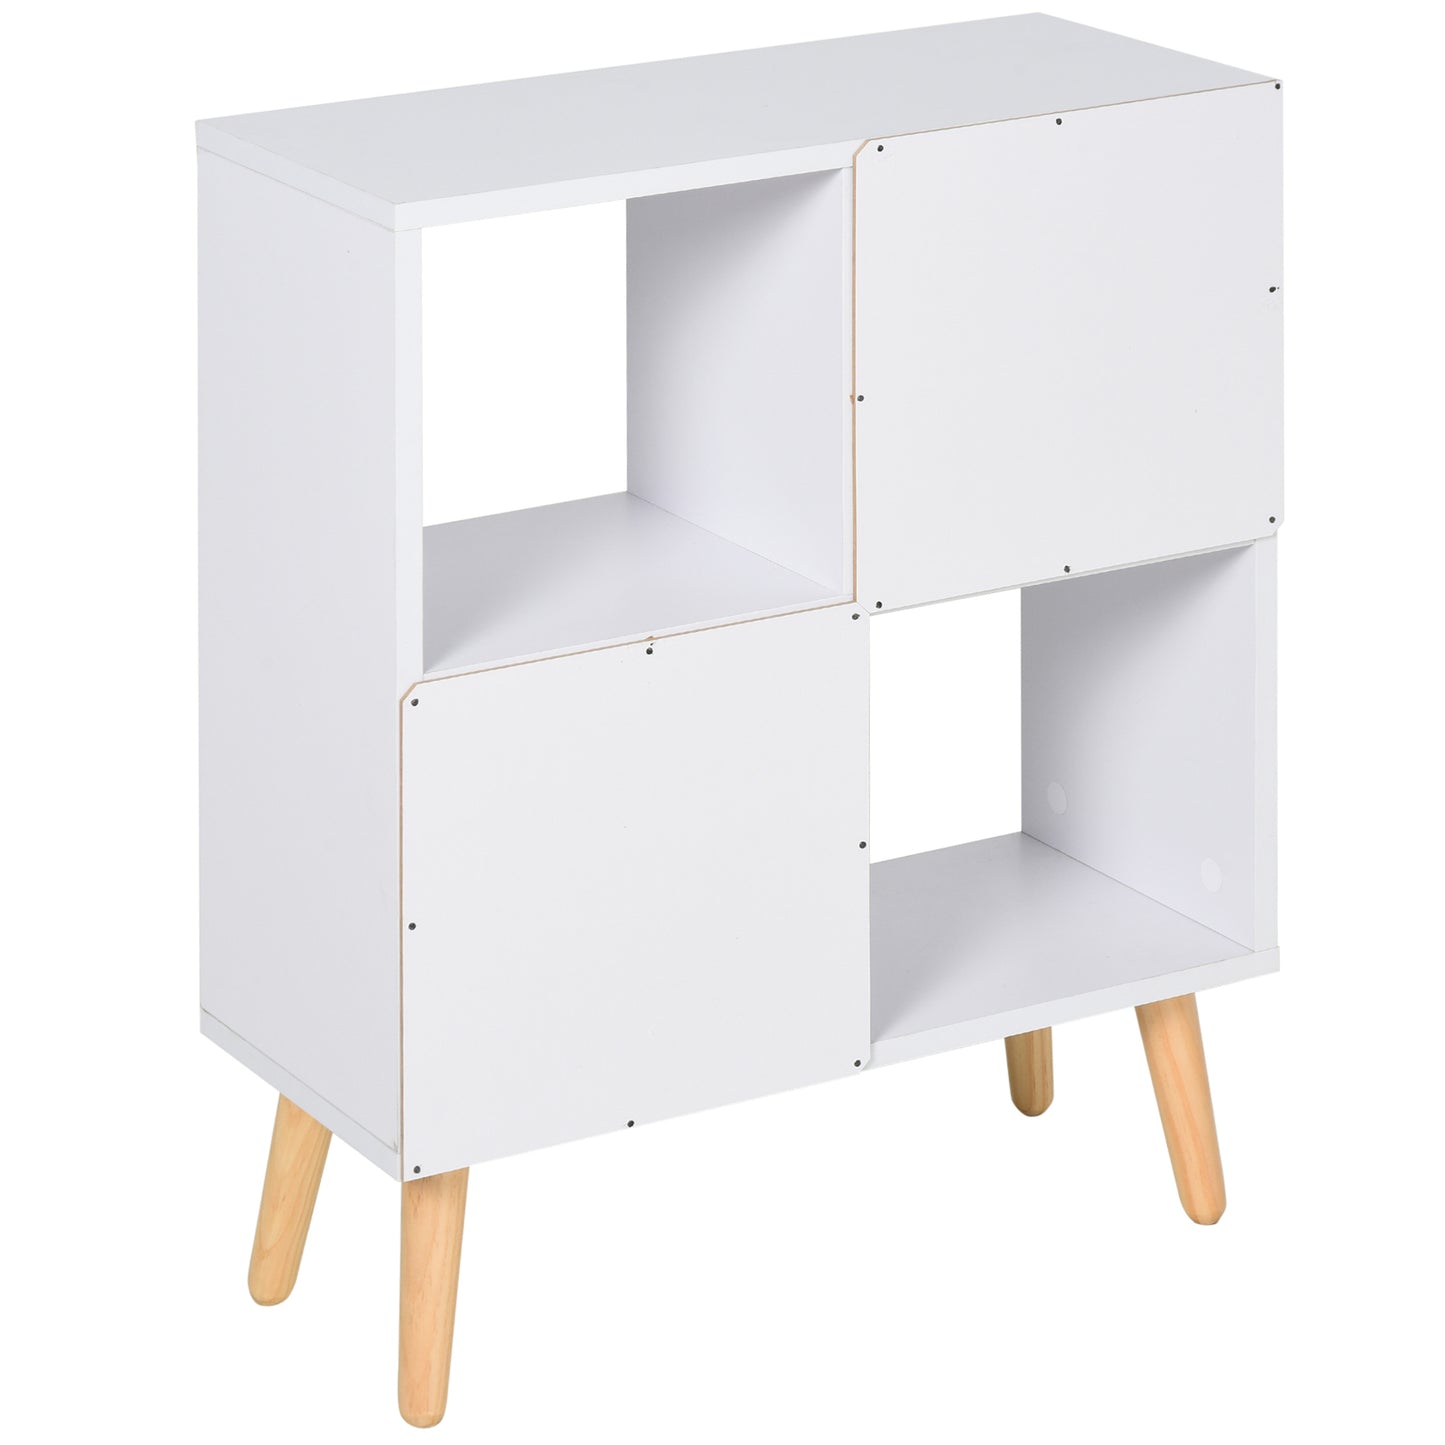 HOMCOM Particle Board Elevated 4-Cube Storage Unit White